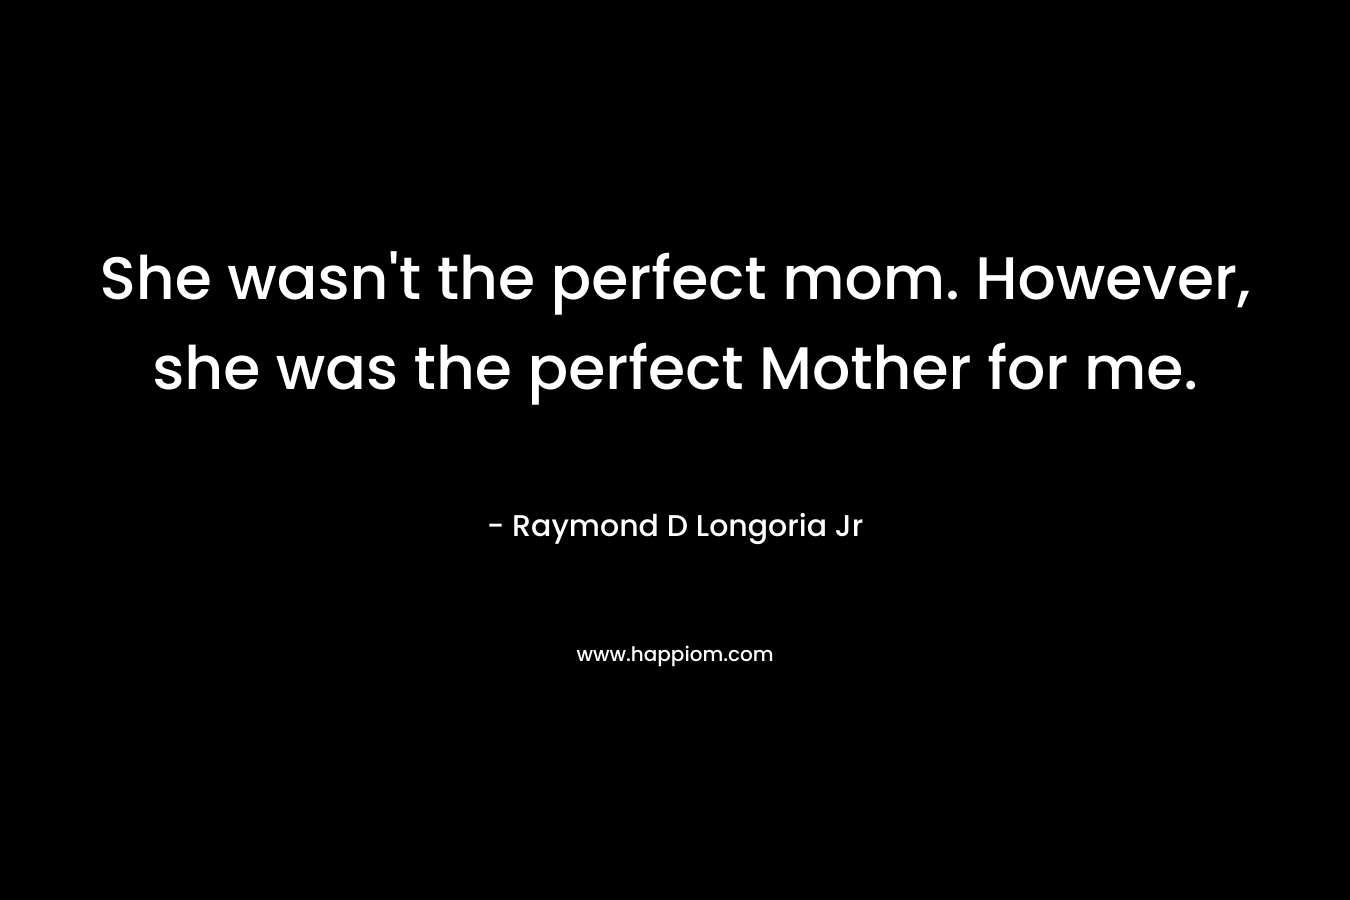 She wasn’t the perfect mom. However, she was the perfect Mother for me. – Raymond D Longoria Jr